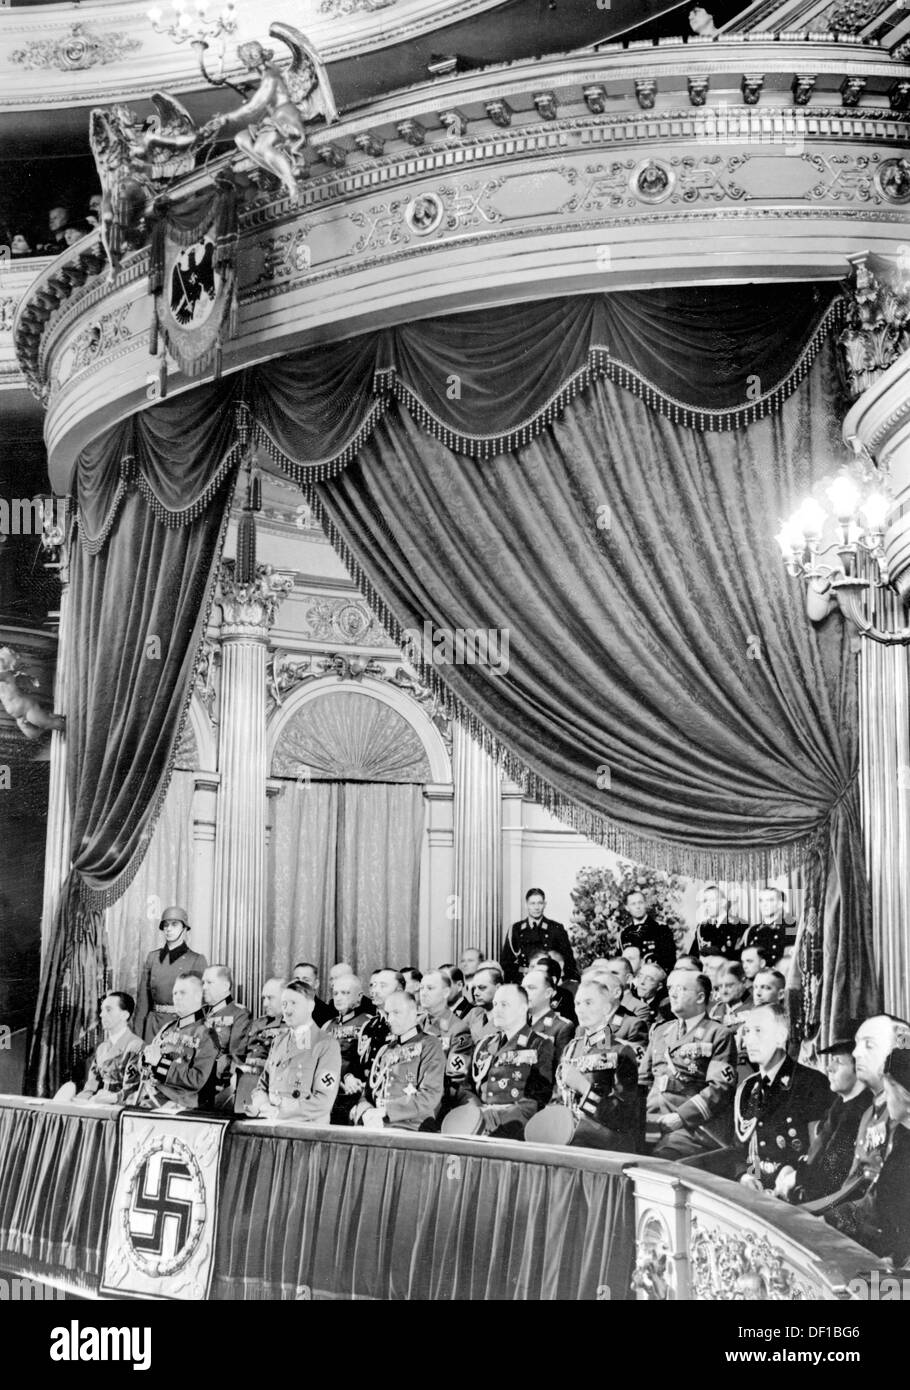 The image from the Nazi Propaganda! shows Adolf Hitler in the luxury suite of the Berlin State Opera at Unter den Linden in Berlin, Germany, on the occasion of the Heldengedenktag (Day of Commemoration of Heroes) on 12 March 1939. First row (l-r): Reich Propaganda Minister Joseph Goebbels, Field Marshal Wilhelm Keitel, Hitler, Commander-in-Chief of the Army Walther von Brauchitsch,  General of the Luftwaffe Hans-Jürgen Stumpff, General Fedor von Bock. Behind Bock, Head of the National Socialist War Victim's Care Hanns Oberlindober. 4-r SS-Obergruppenführer Reinhard Heydrich. To the right behin Stock Photo